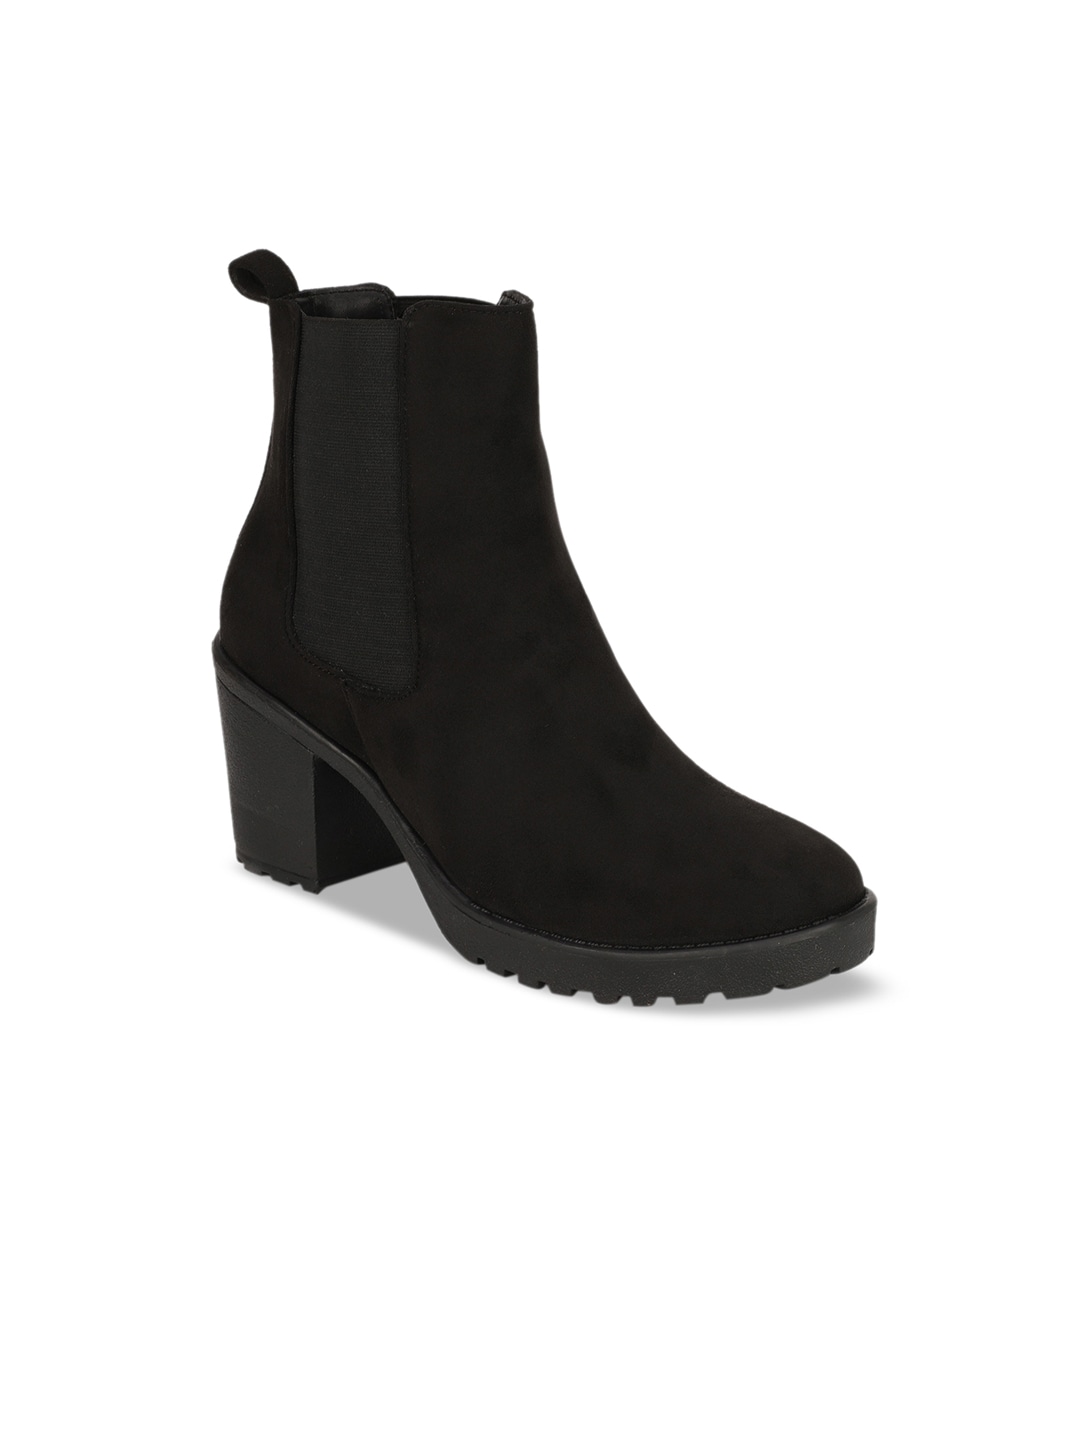 Bruno Manetti Black Suede Block Heeled Boots Price in India